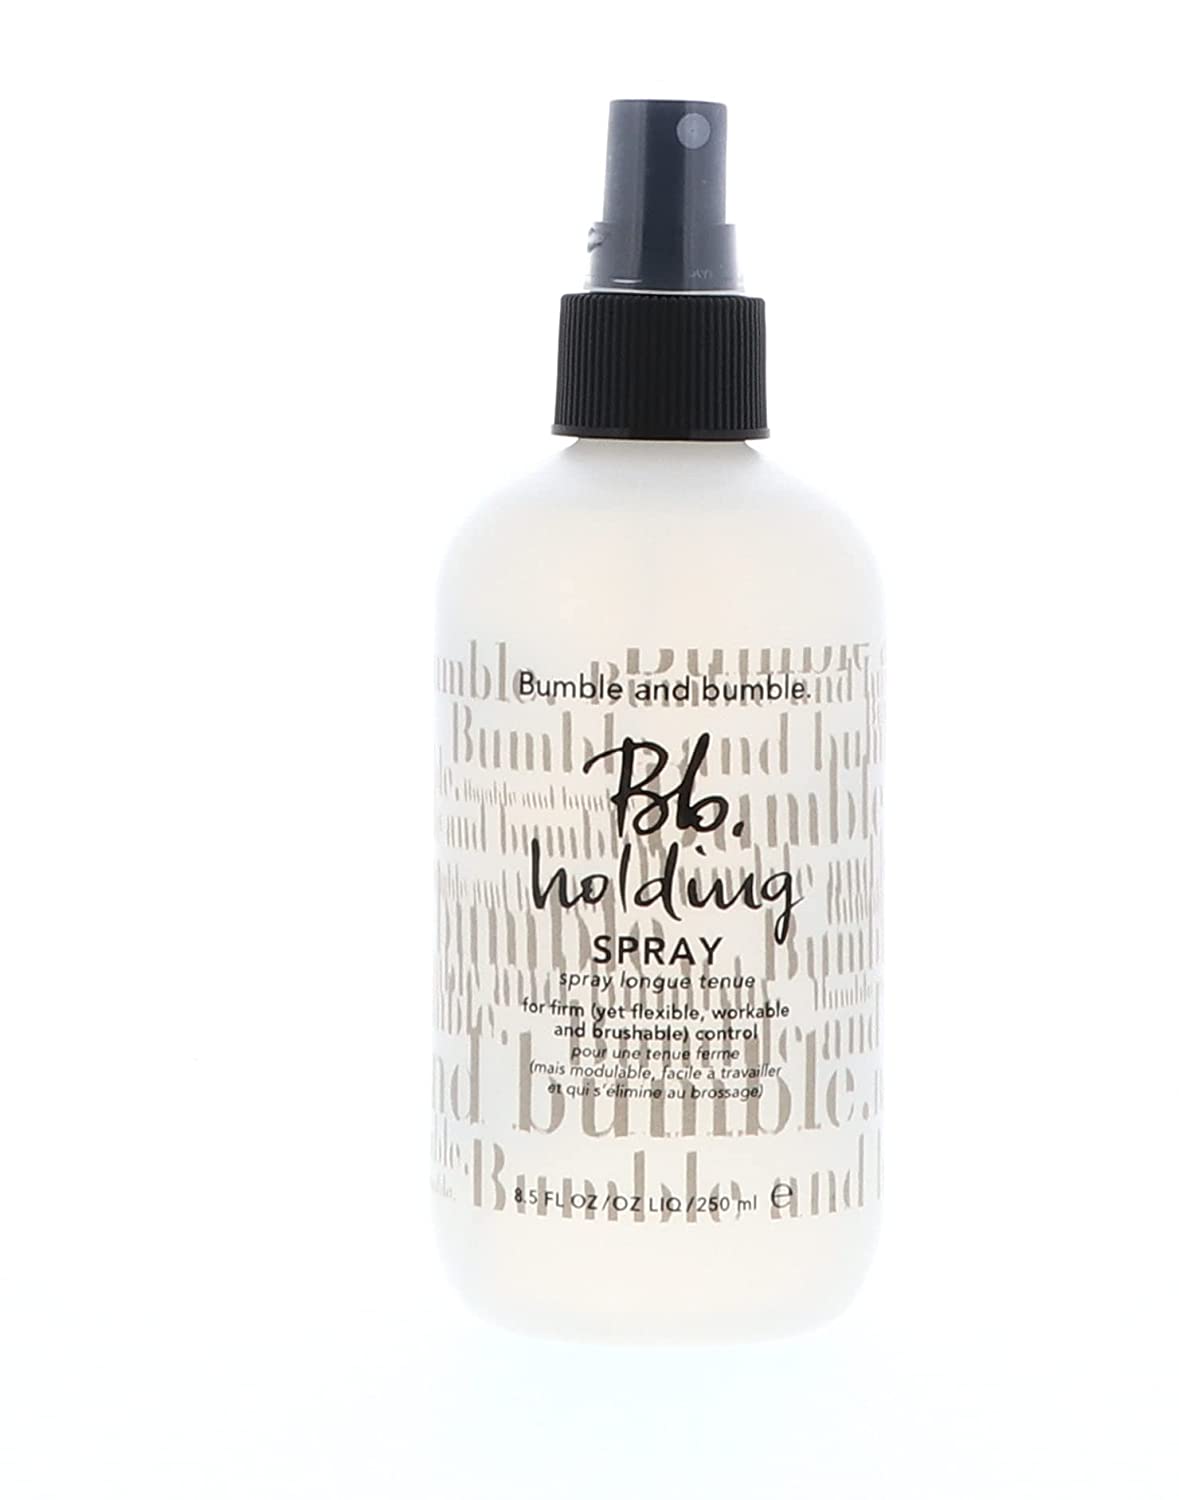 Bumble and Bumble Holding Styling Spray